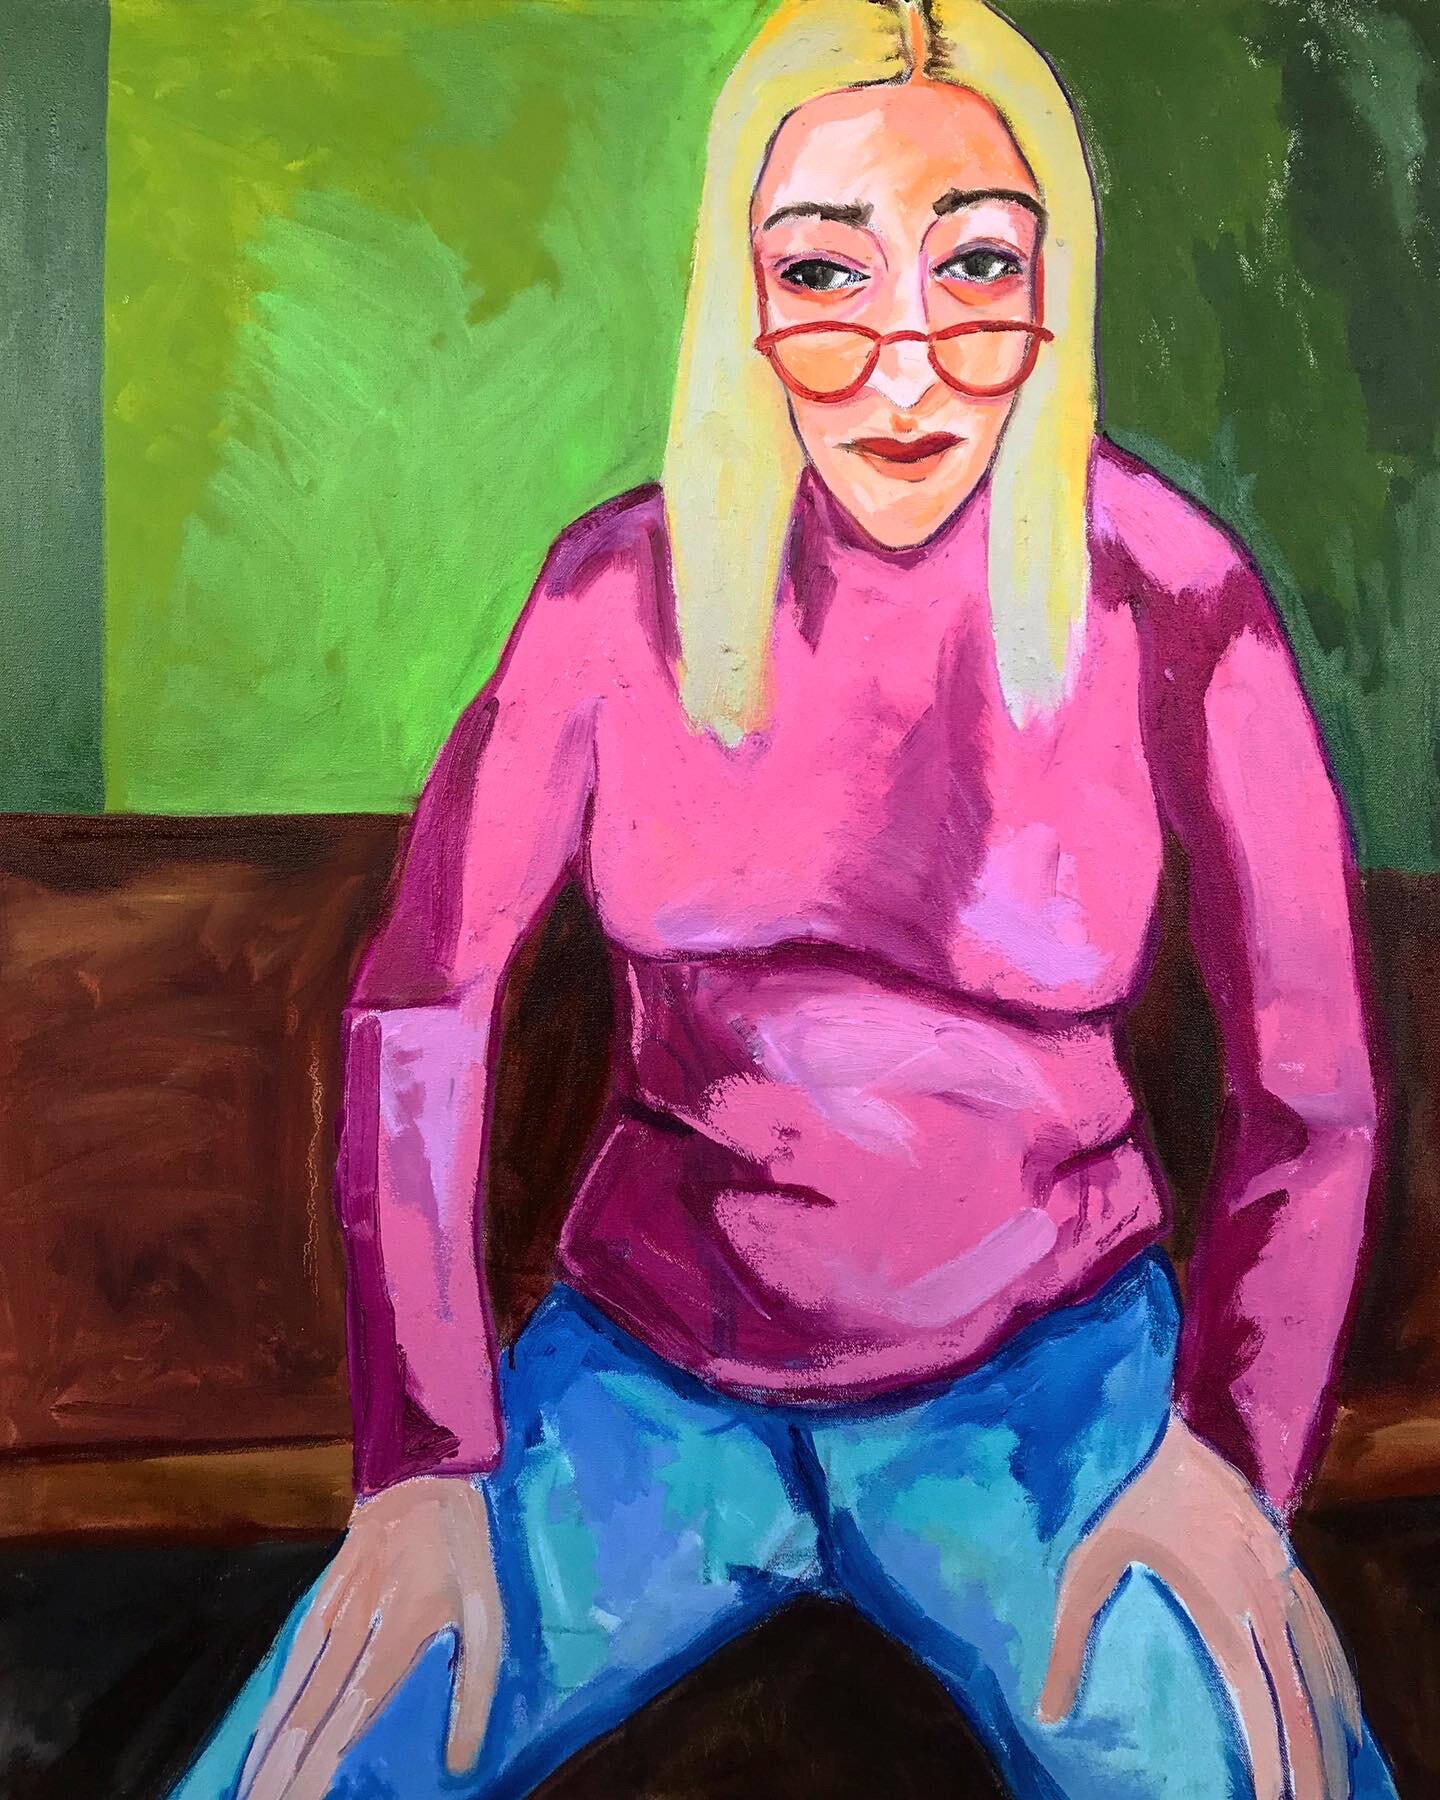   I Don’t Own Anything Pink   Oil and Acrylic on Canvas   2020  32 inches x 40 inches 